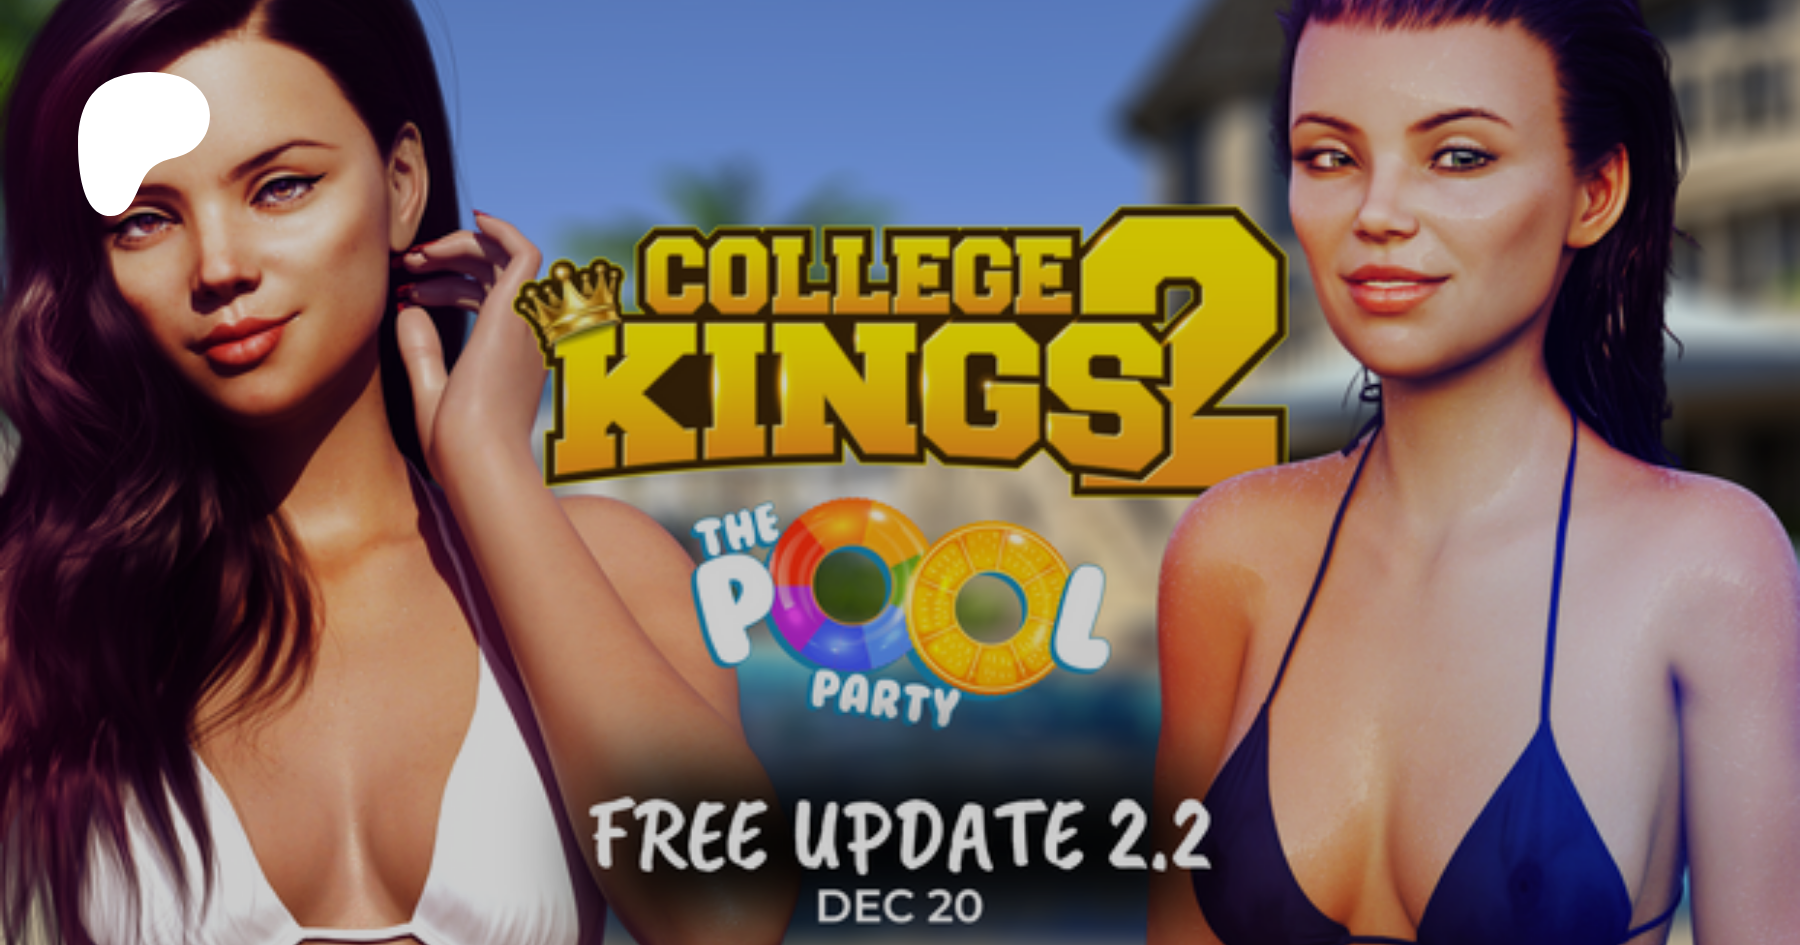 College kings pool party